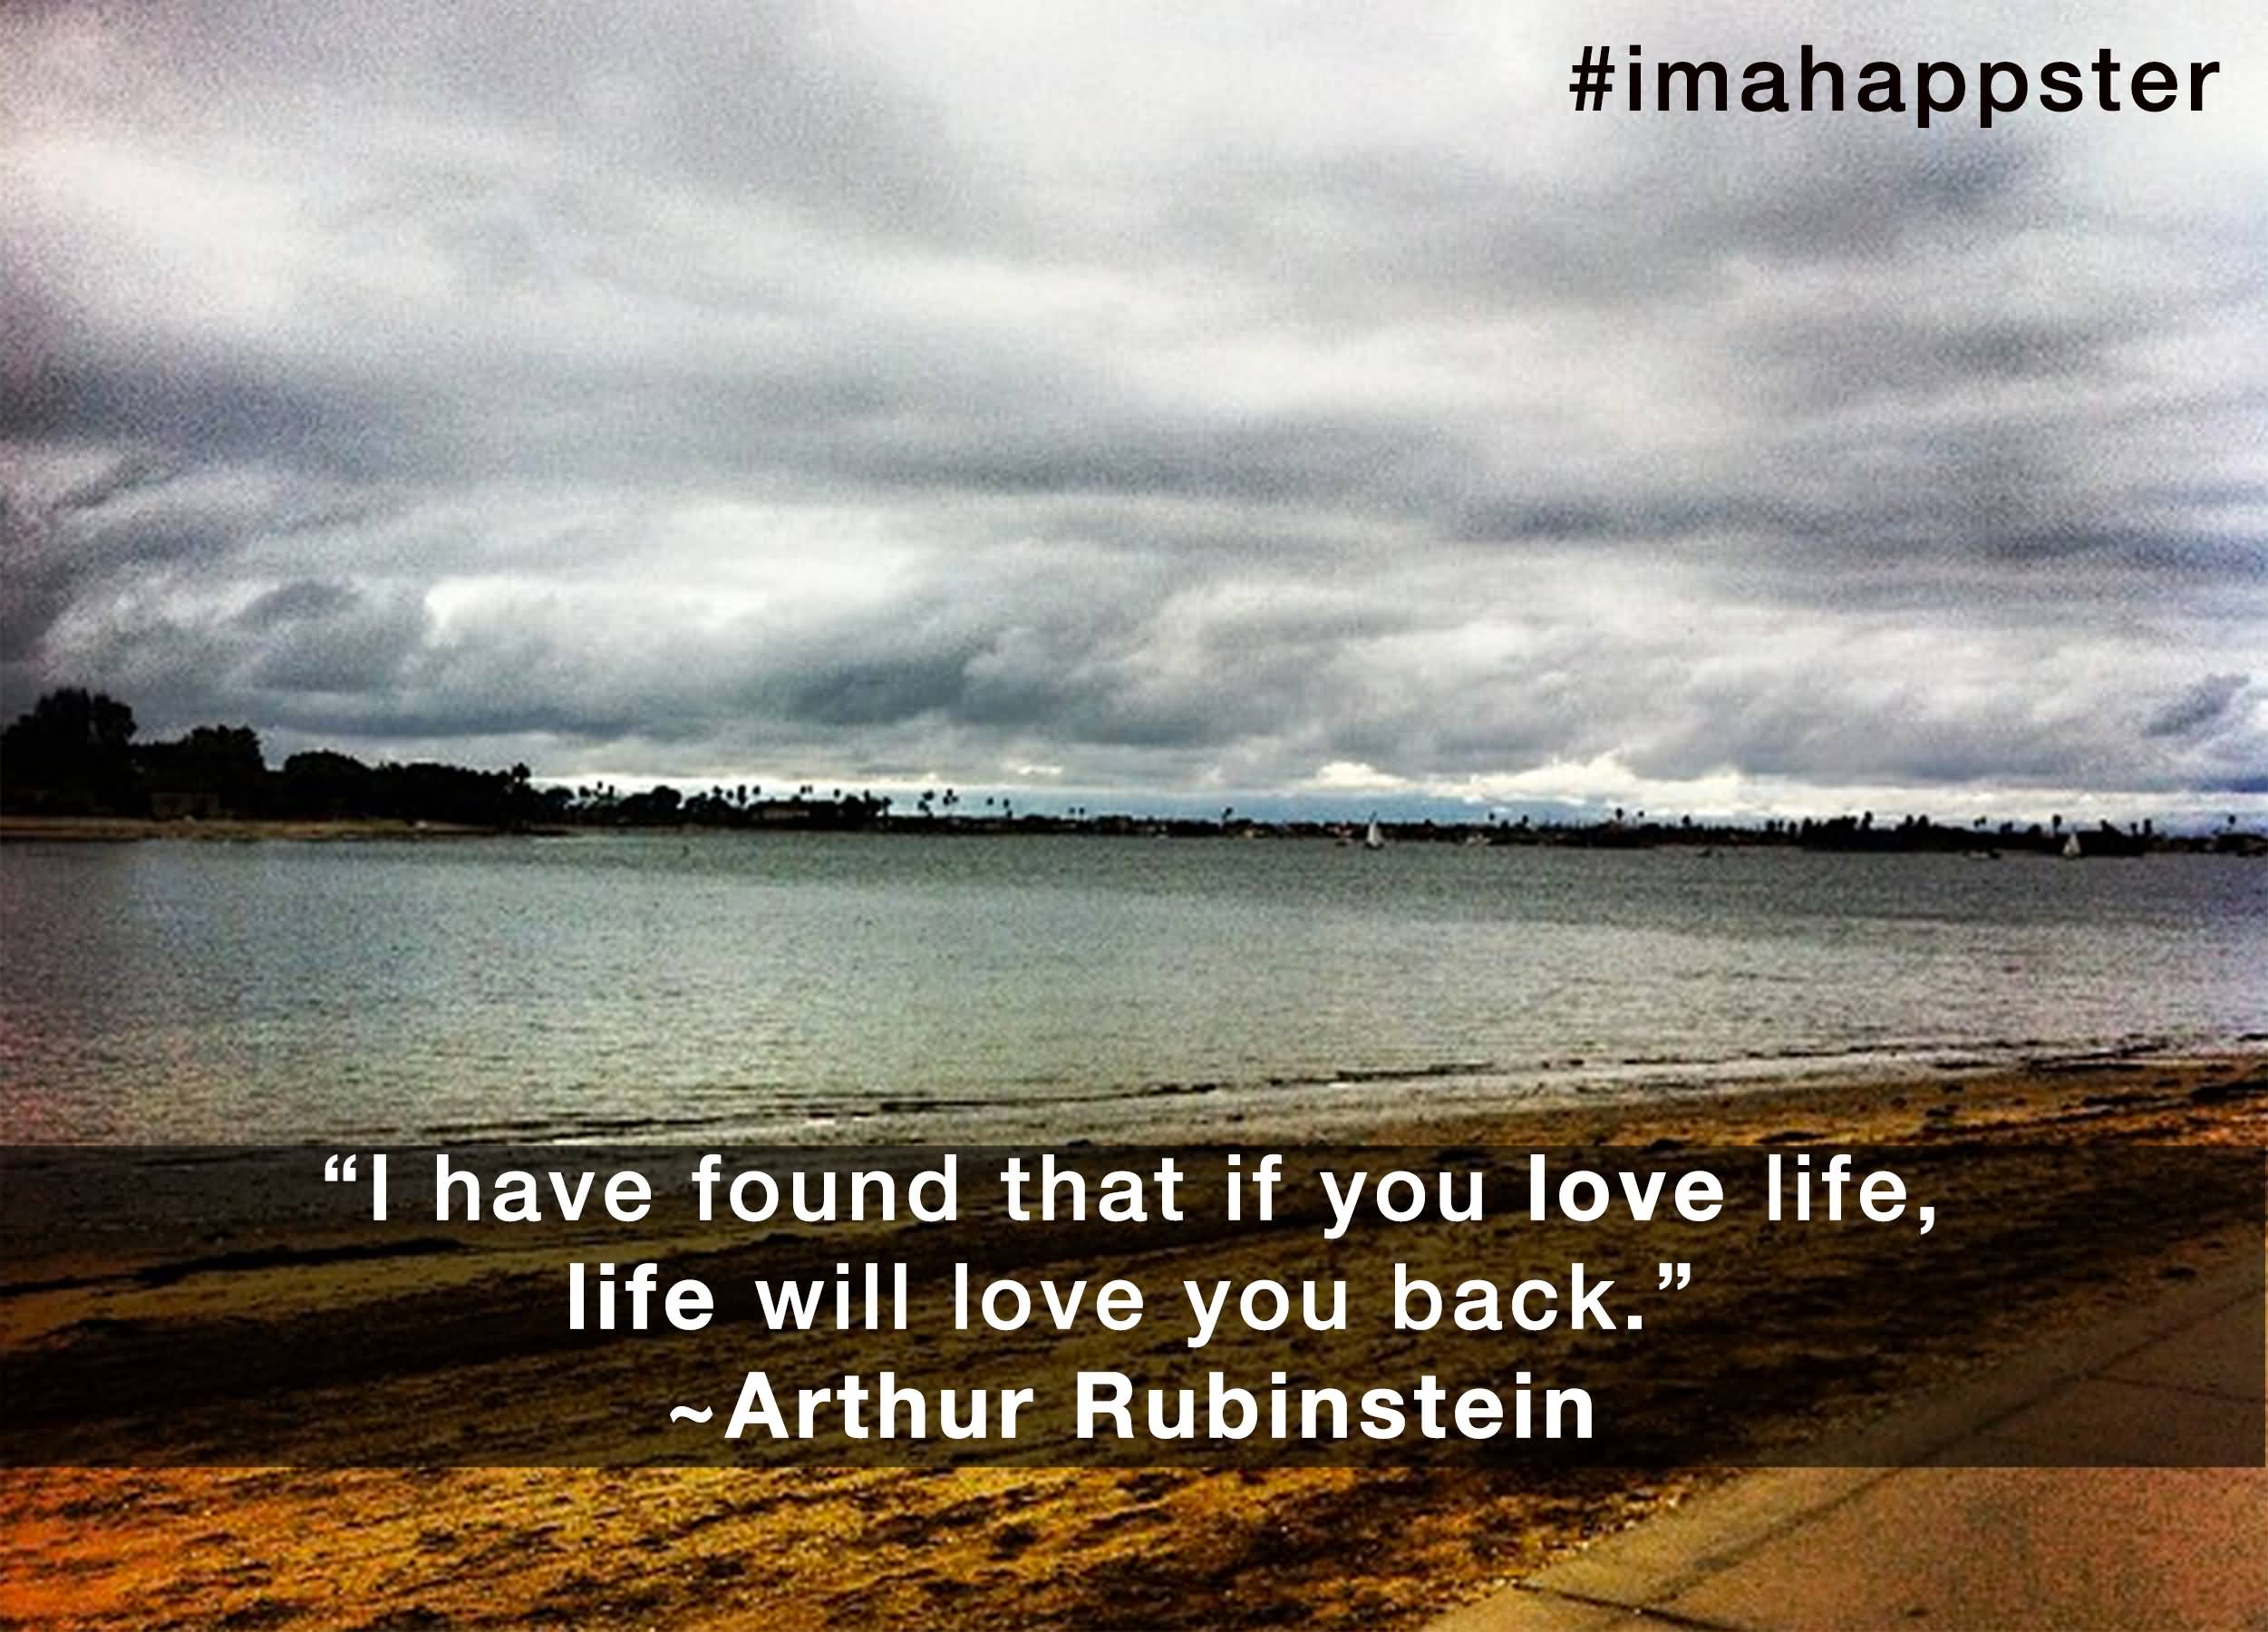 I hope you are happy. I have found that if you Love Life, Life will Love you back. Arthur Rubinstein. I have found that if you Love Life, Life will Love you back.